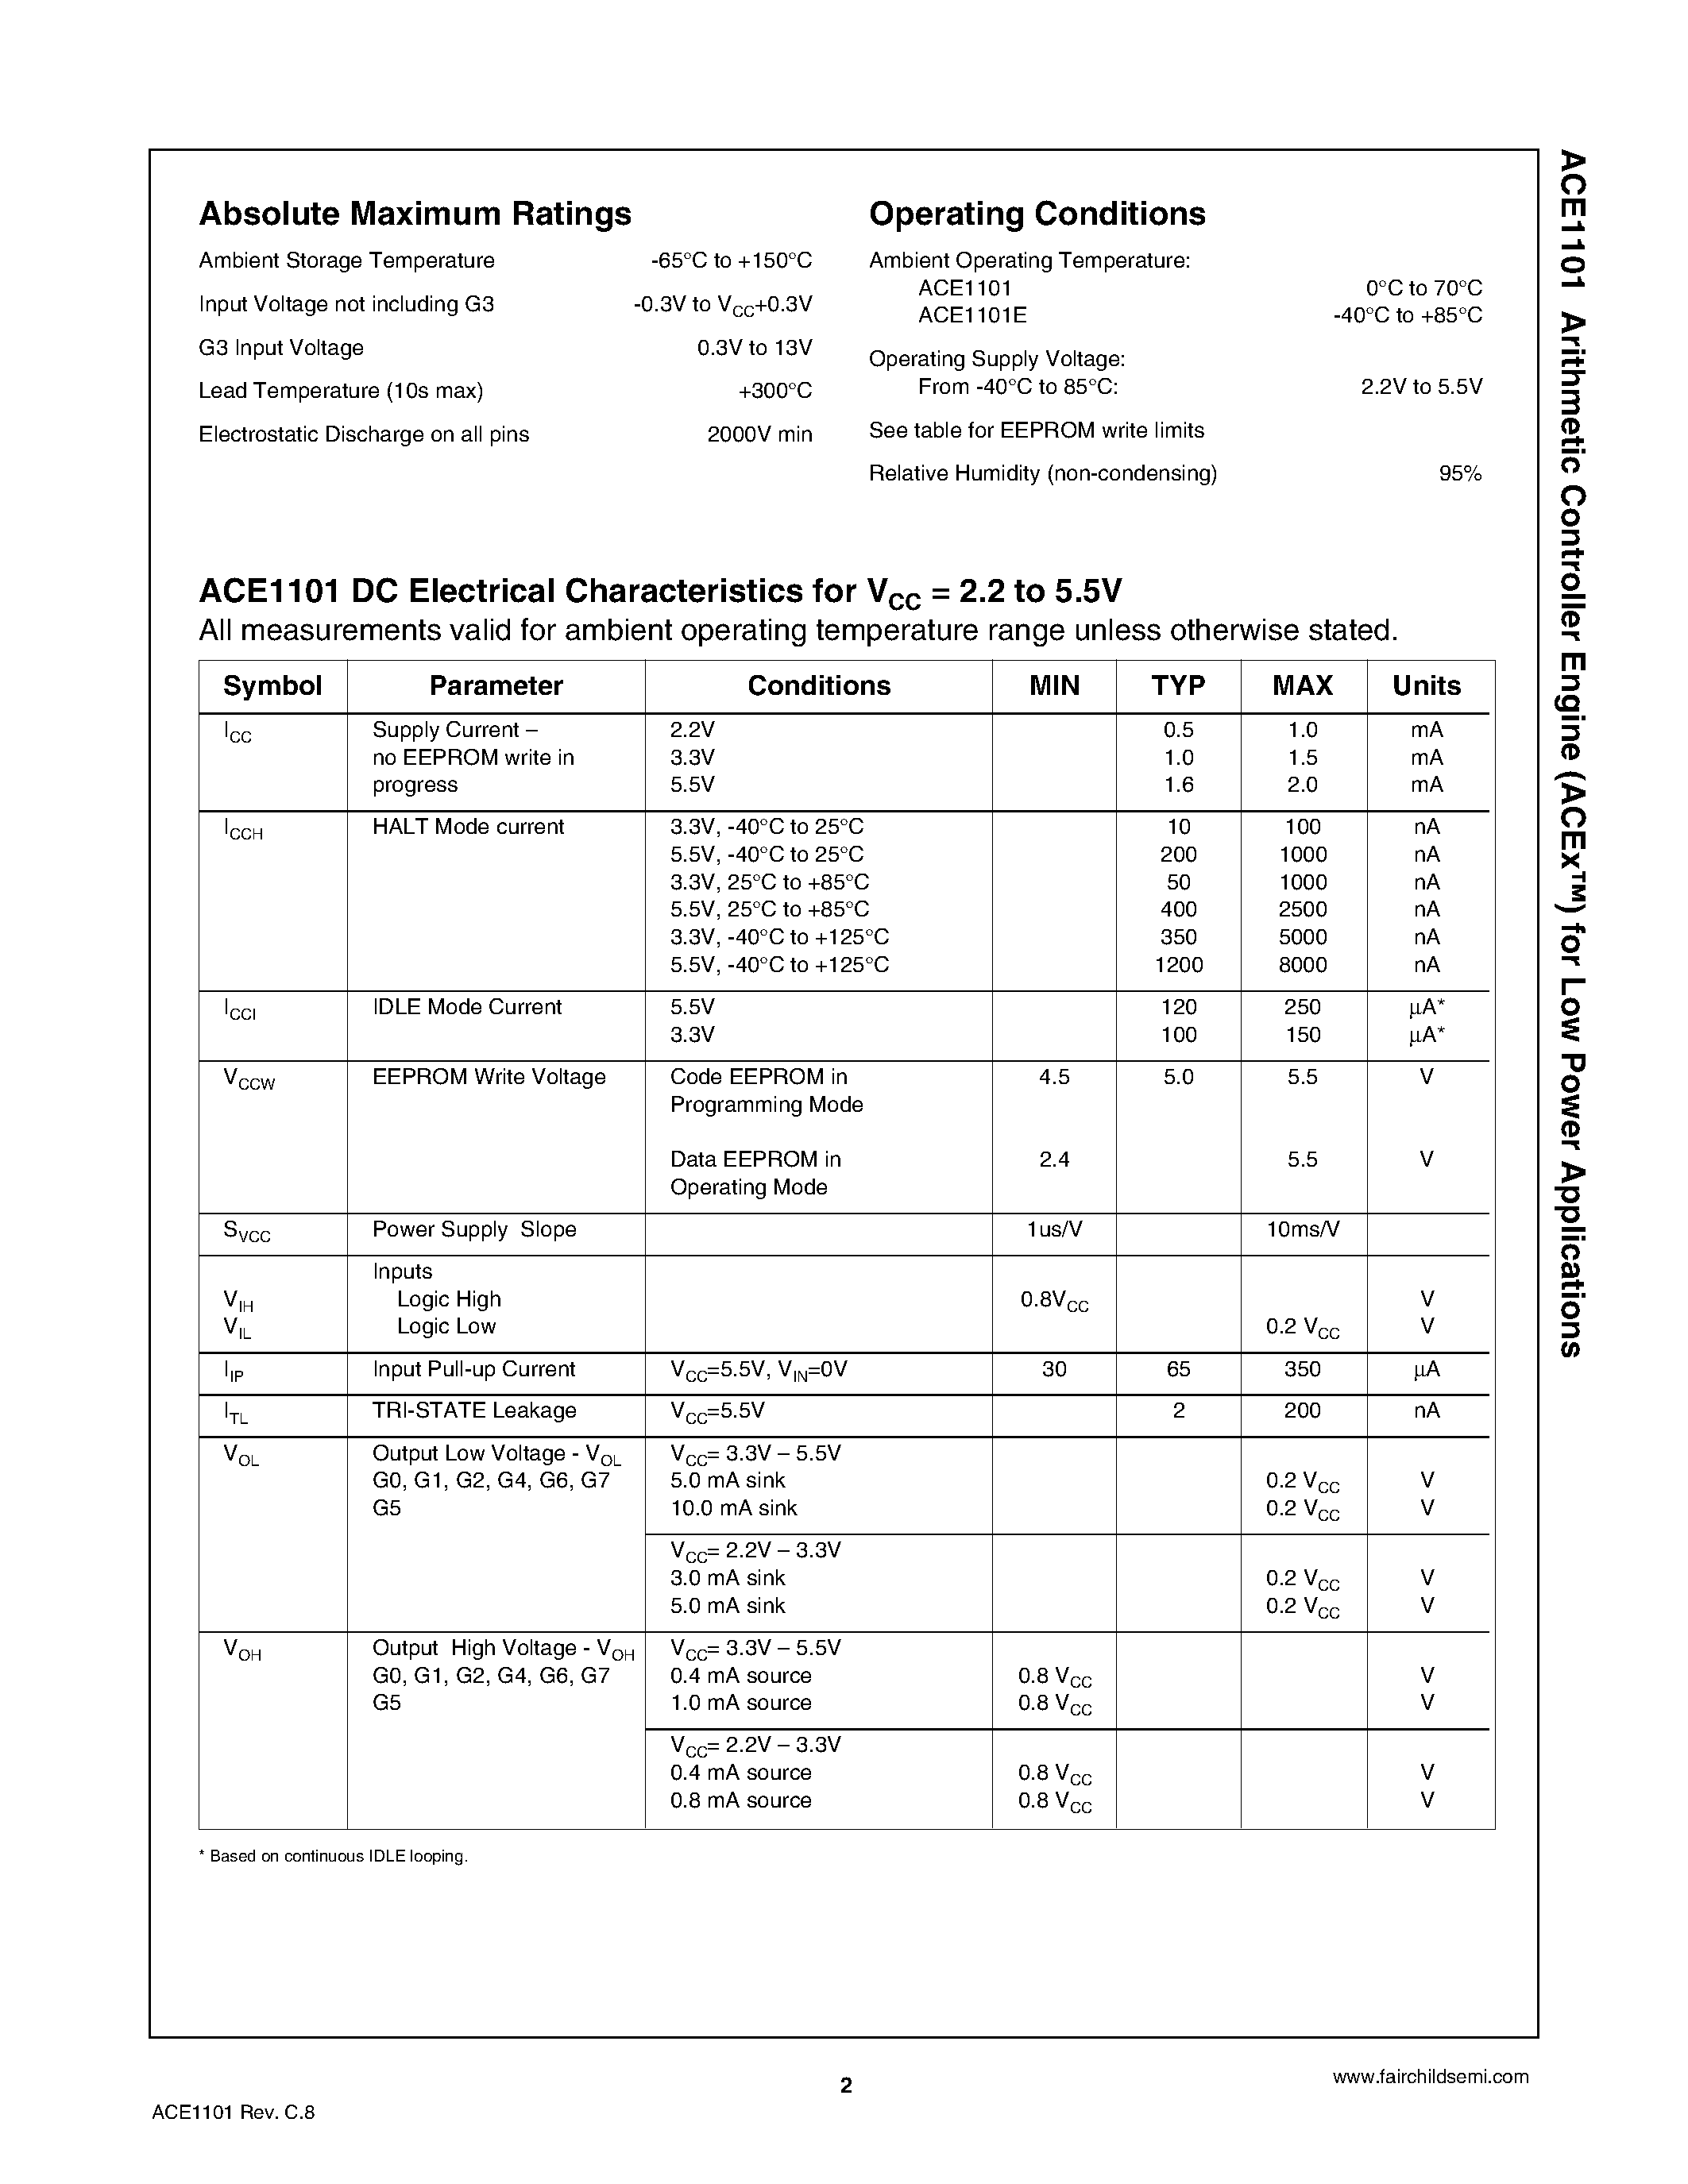 Datasheet ACE1202 - Arithmetic Controller Engine (ACEx) for Low Power Applications page 2